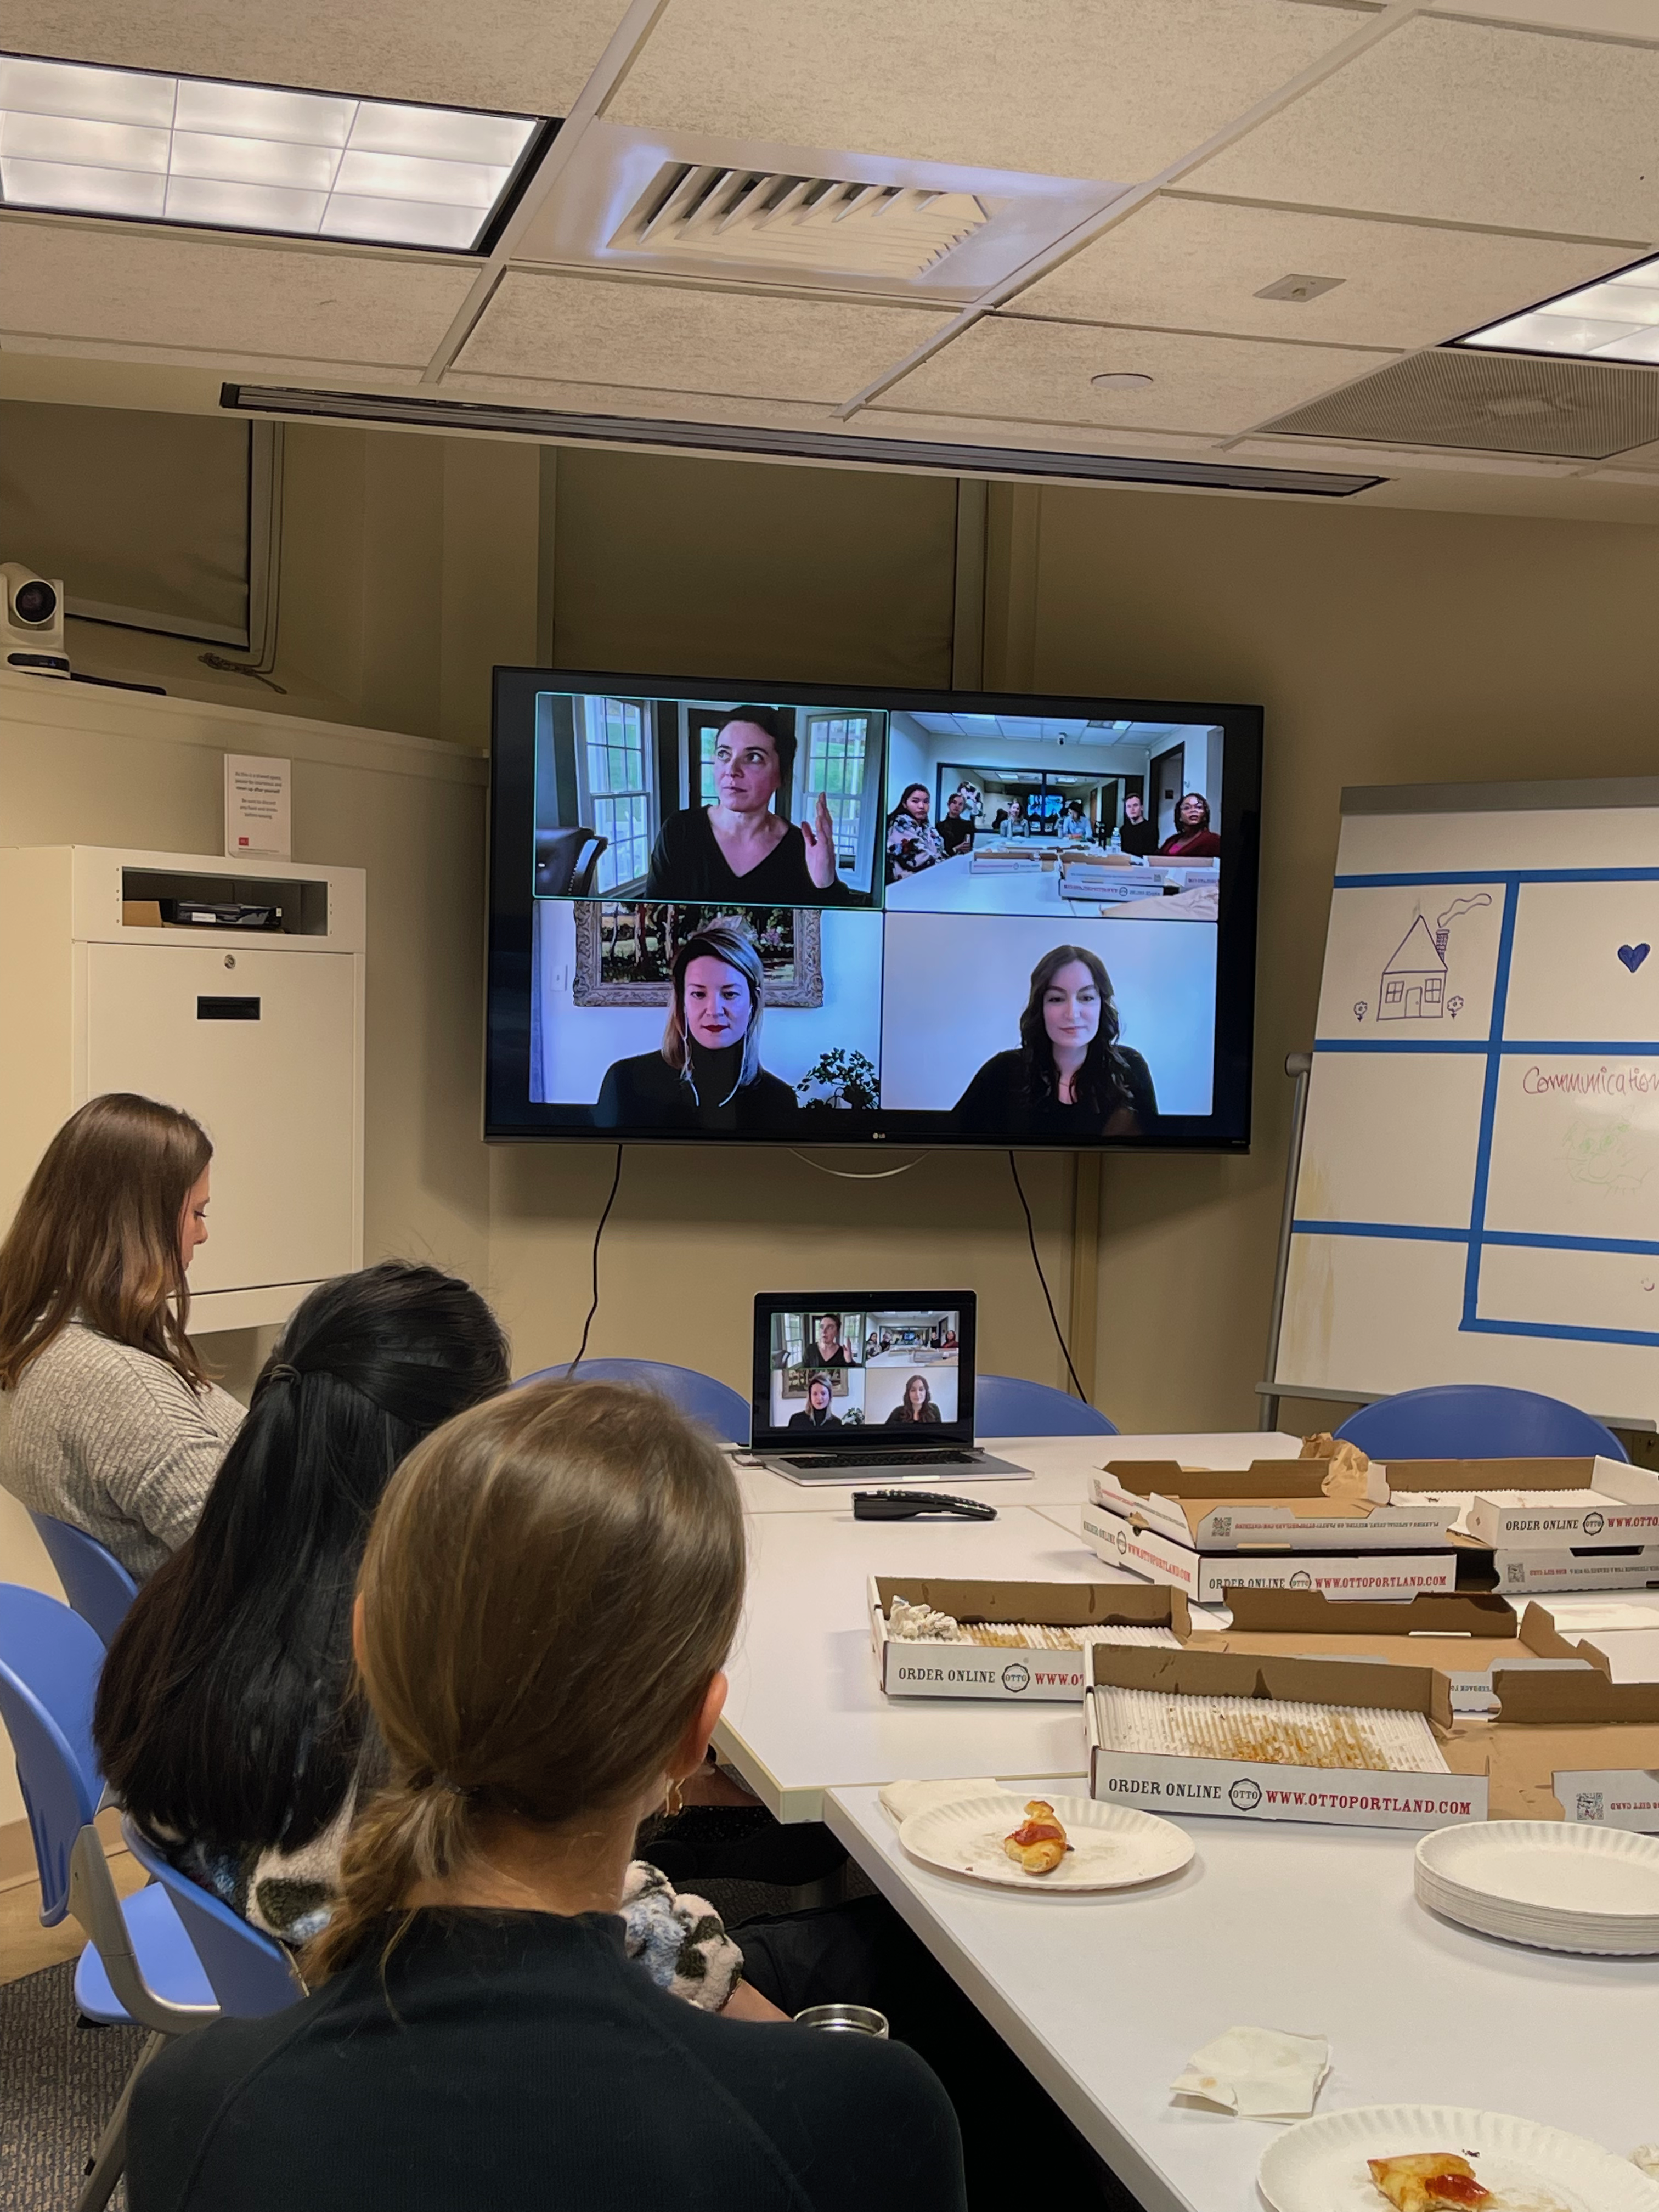 An image of students facing a TV screen, half eaten pizza slices on paper plates on the table in front of them, with a Zoom video on display.